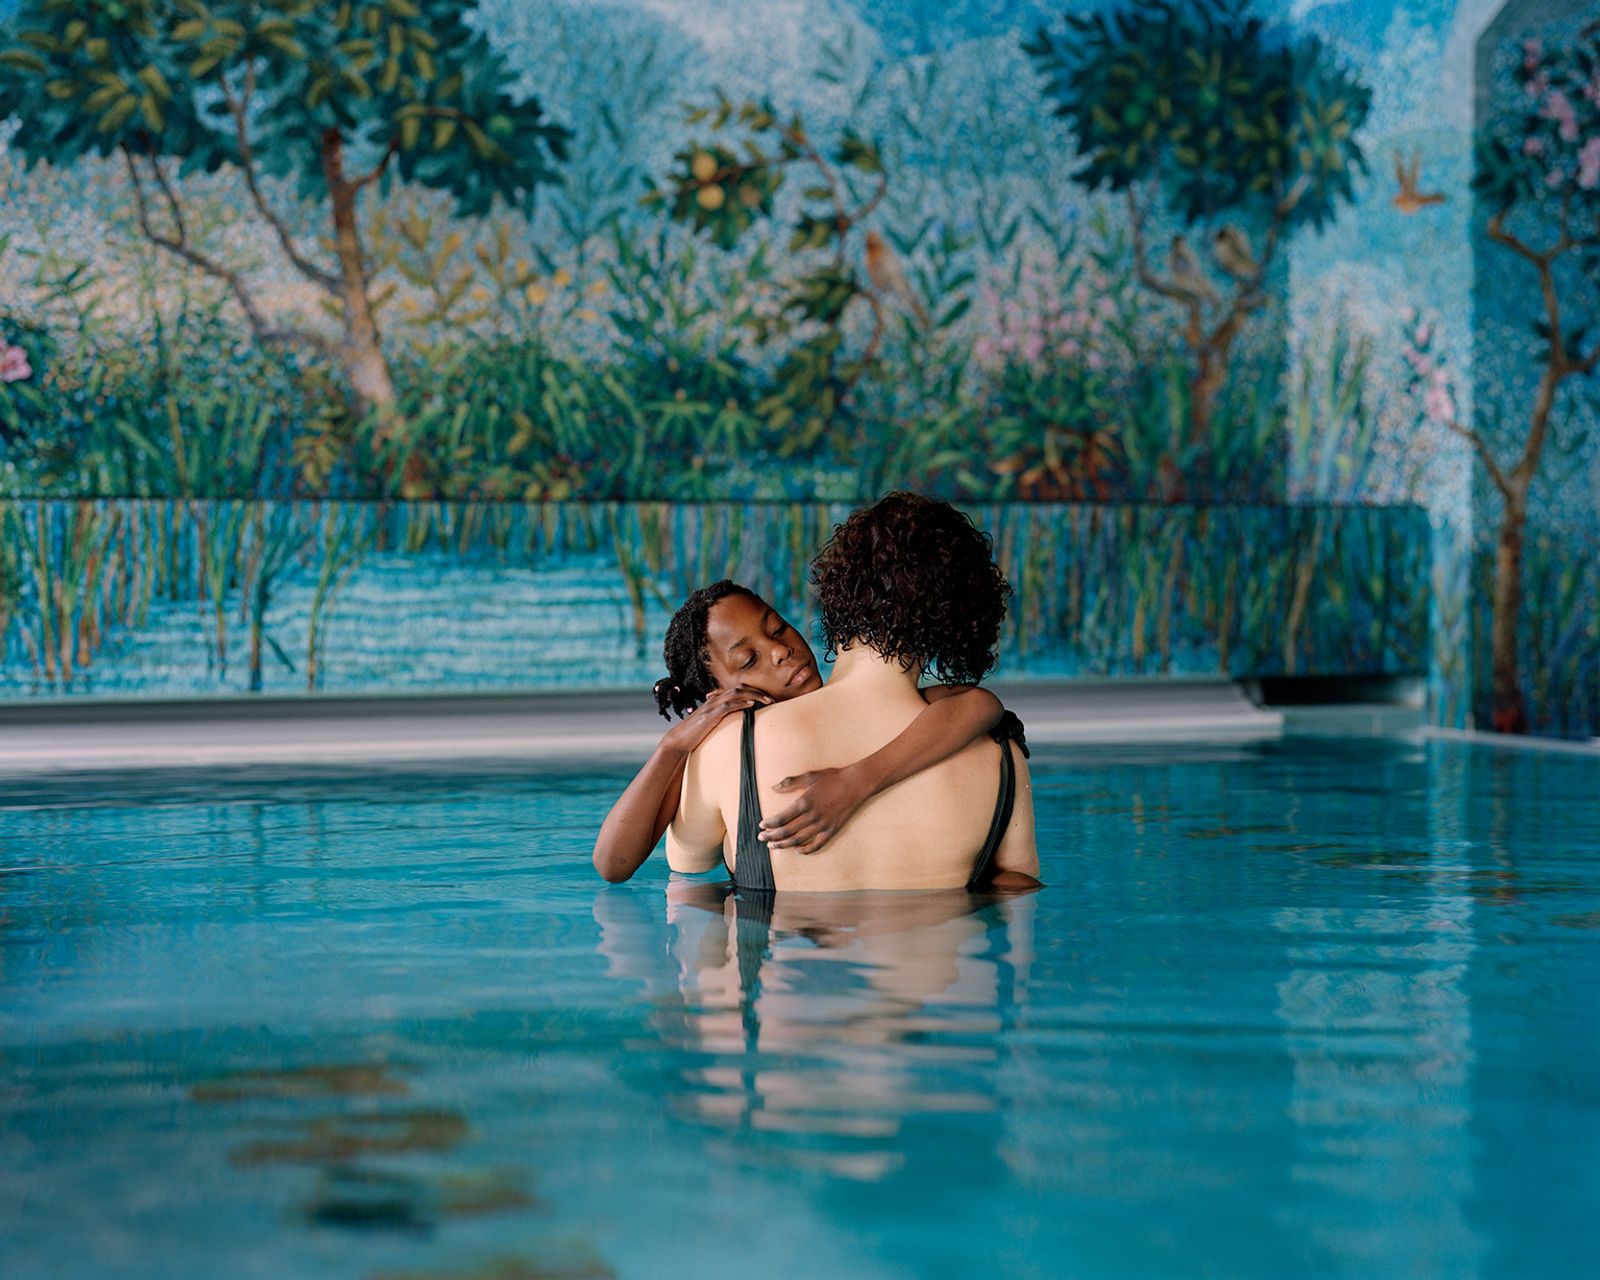 © Erica Nyholm - A Mother and a Daughter in a pool, 2018, Pigment ink print on dipond, Framed, 80 x 100 cm, Ed. 6 + 2 AP